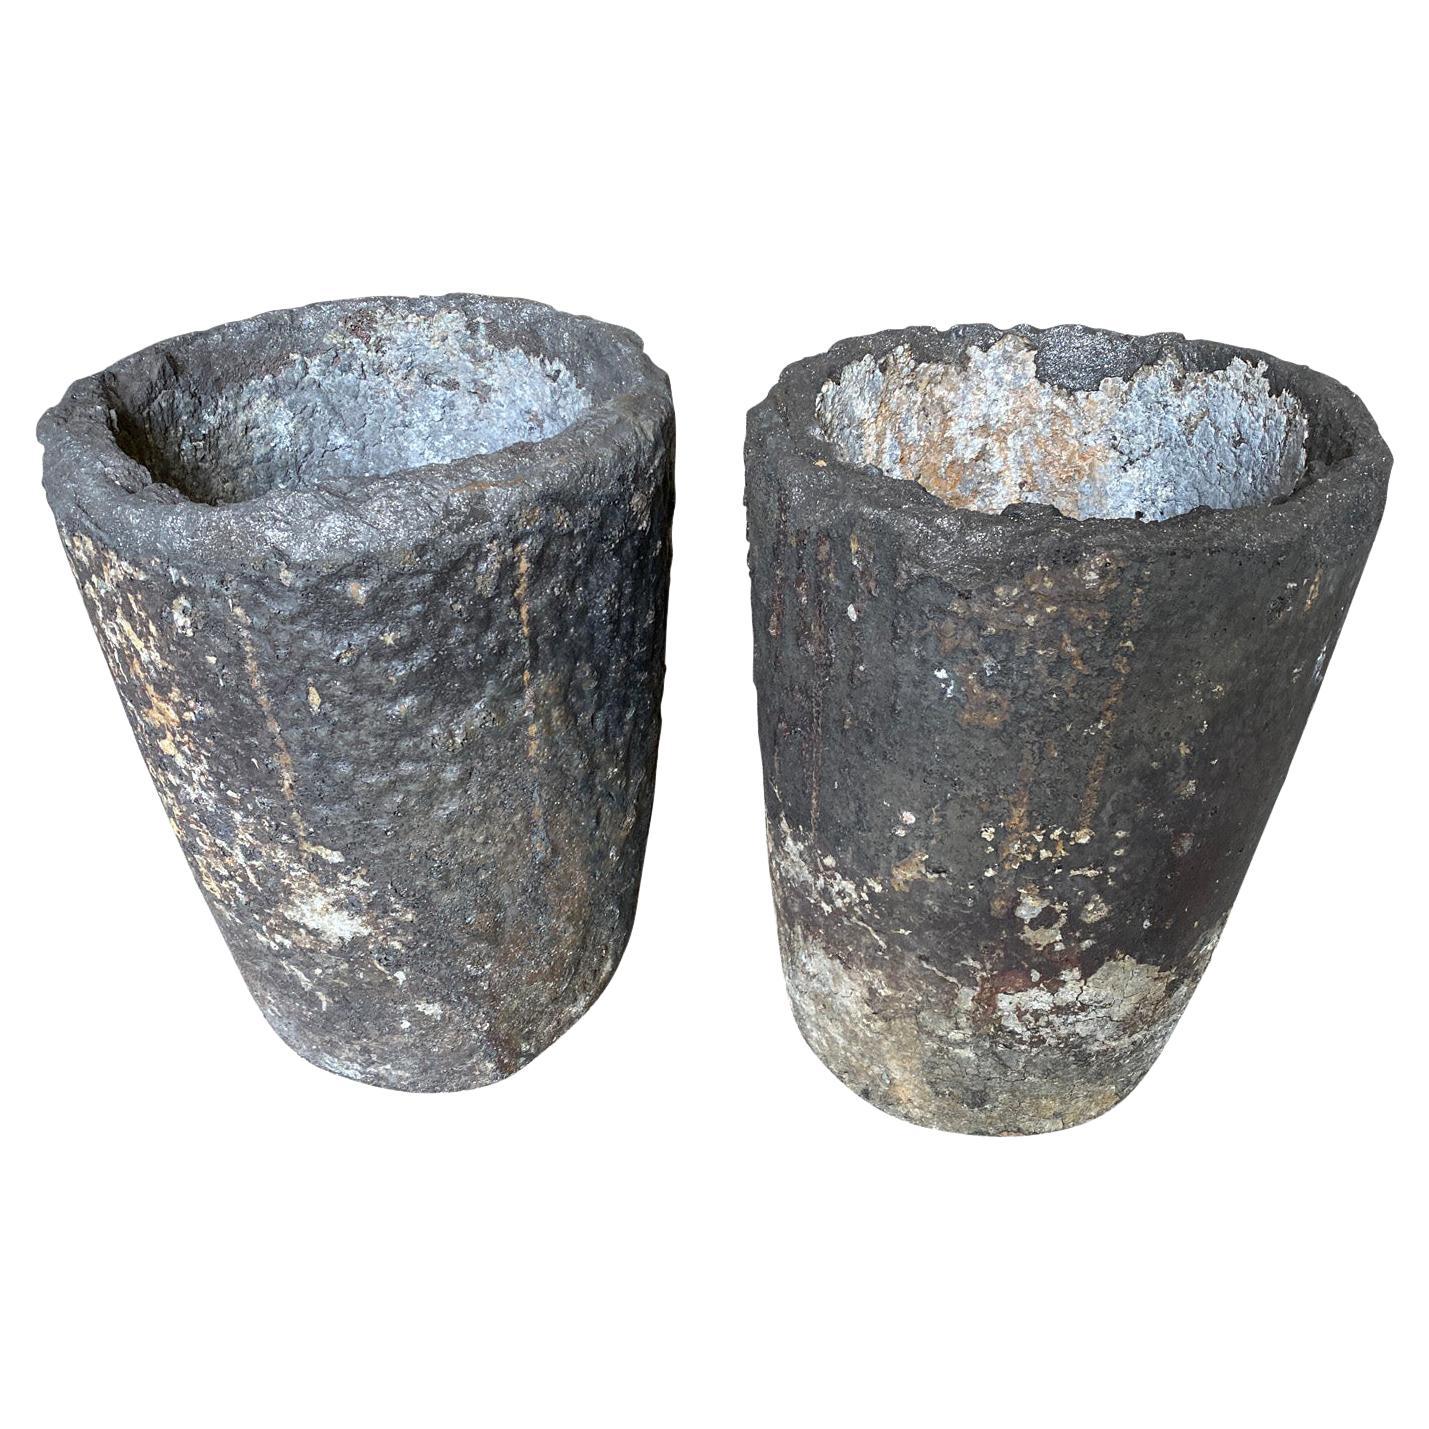 French Pair of Foundry Pots